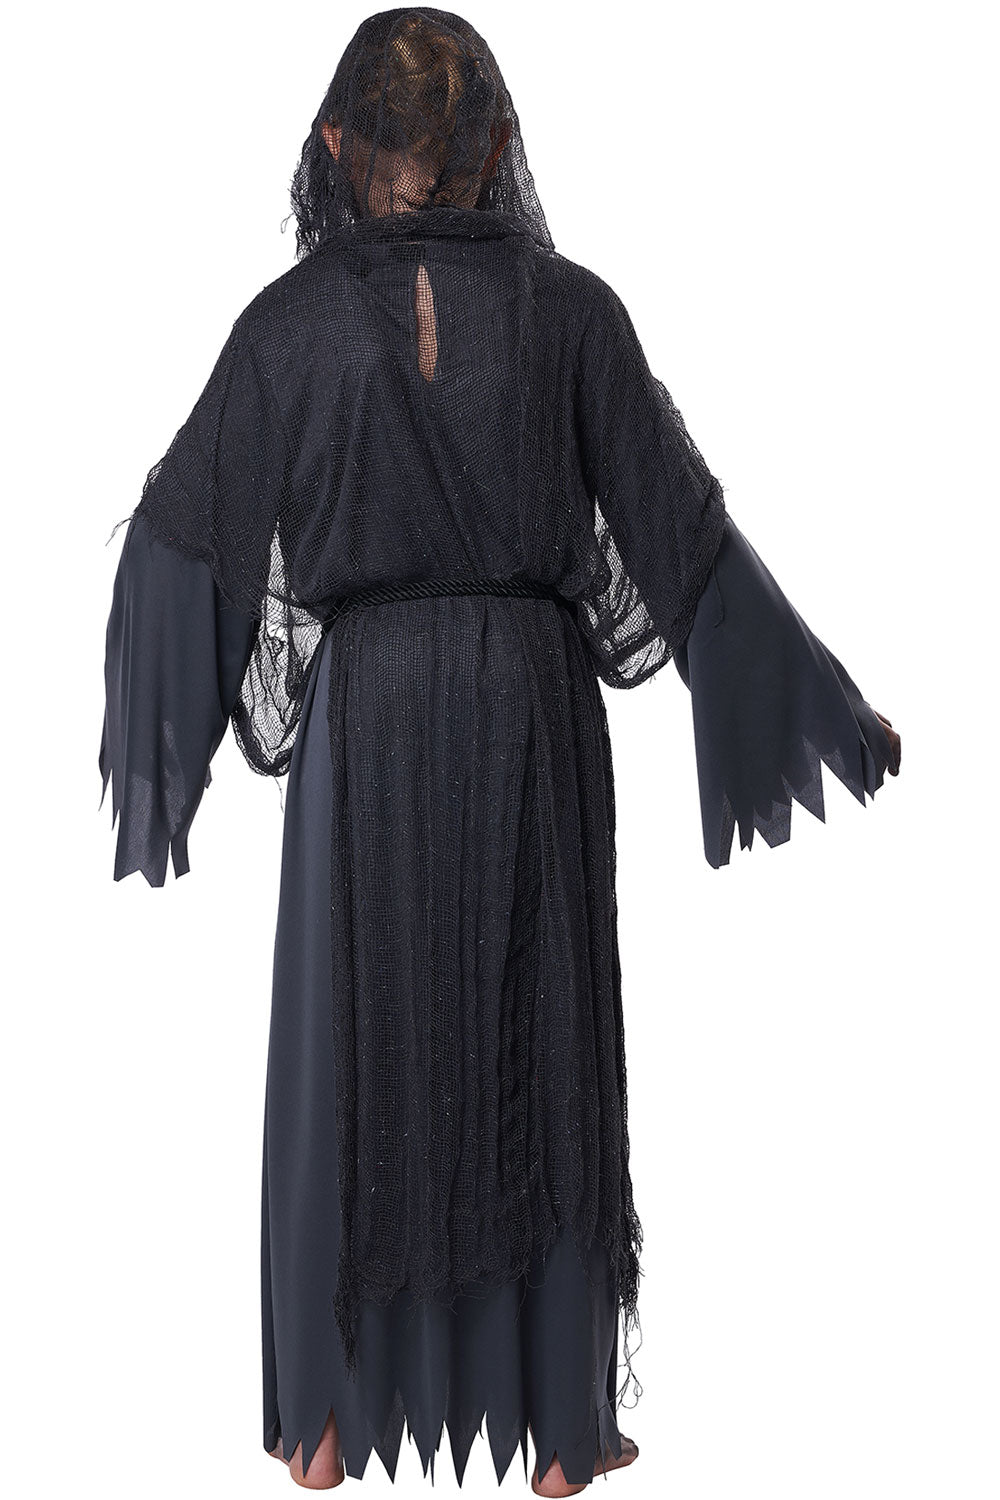 Ghoul In The Graveyard / Child California Costume 3120/091